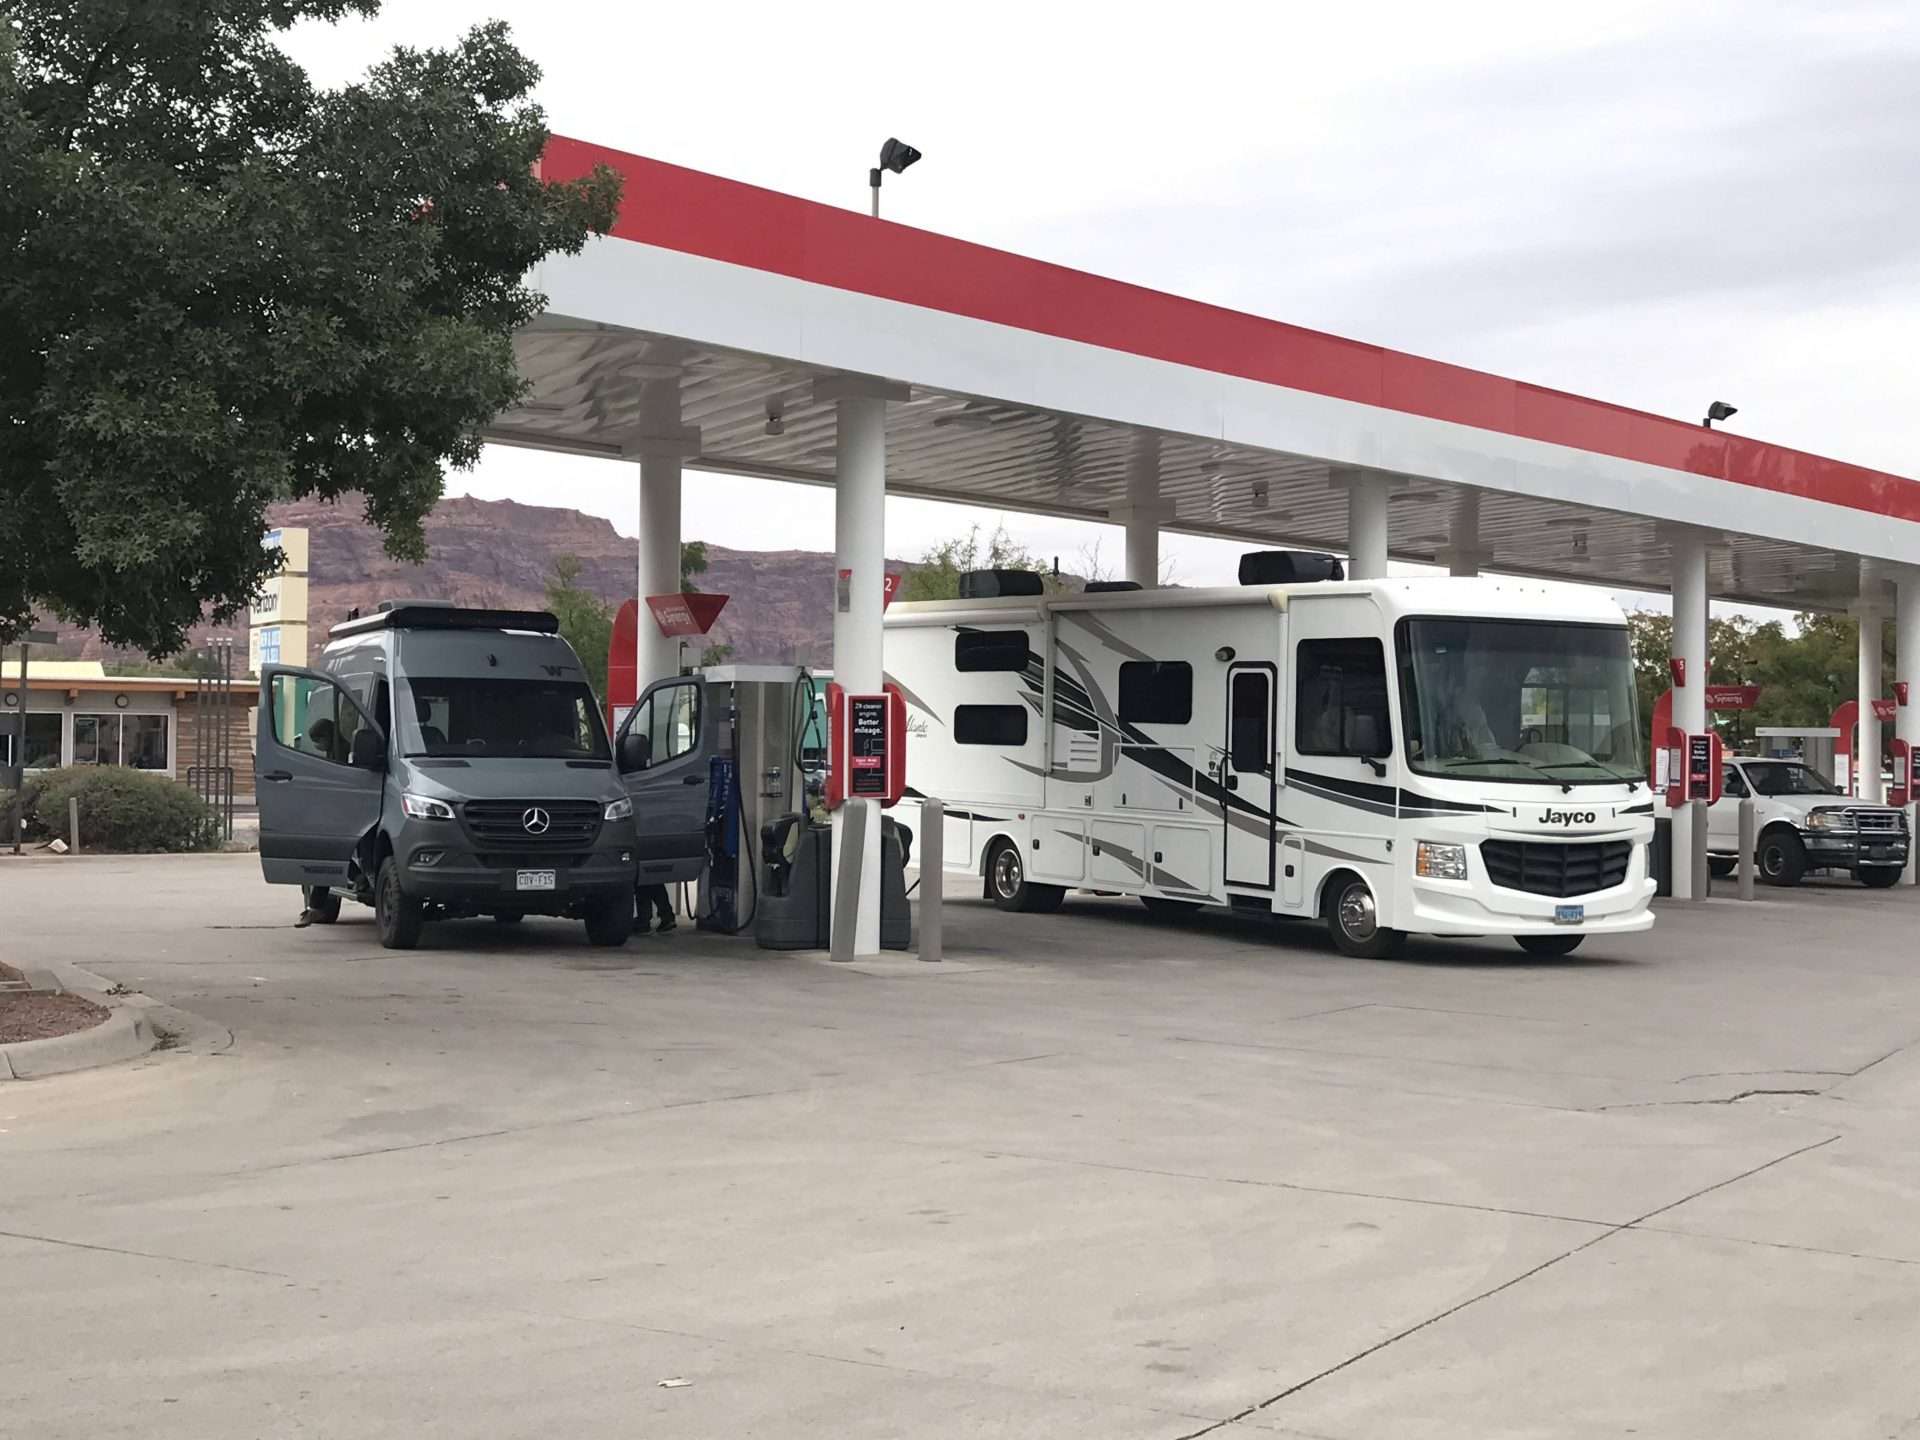 Class A and B motorhomes at gas station